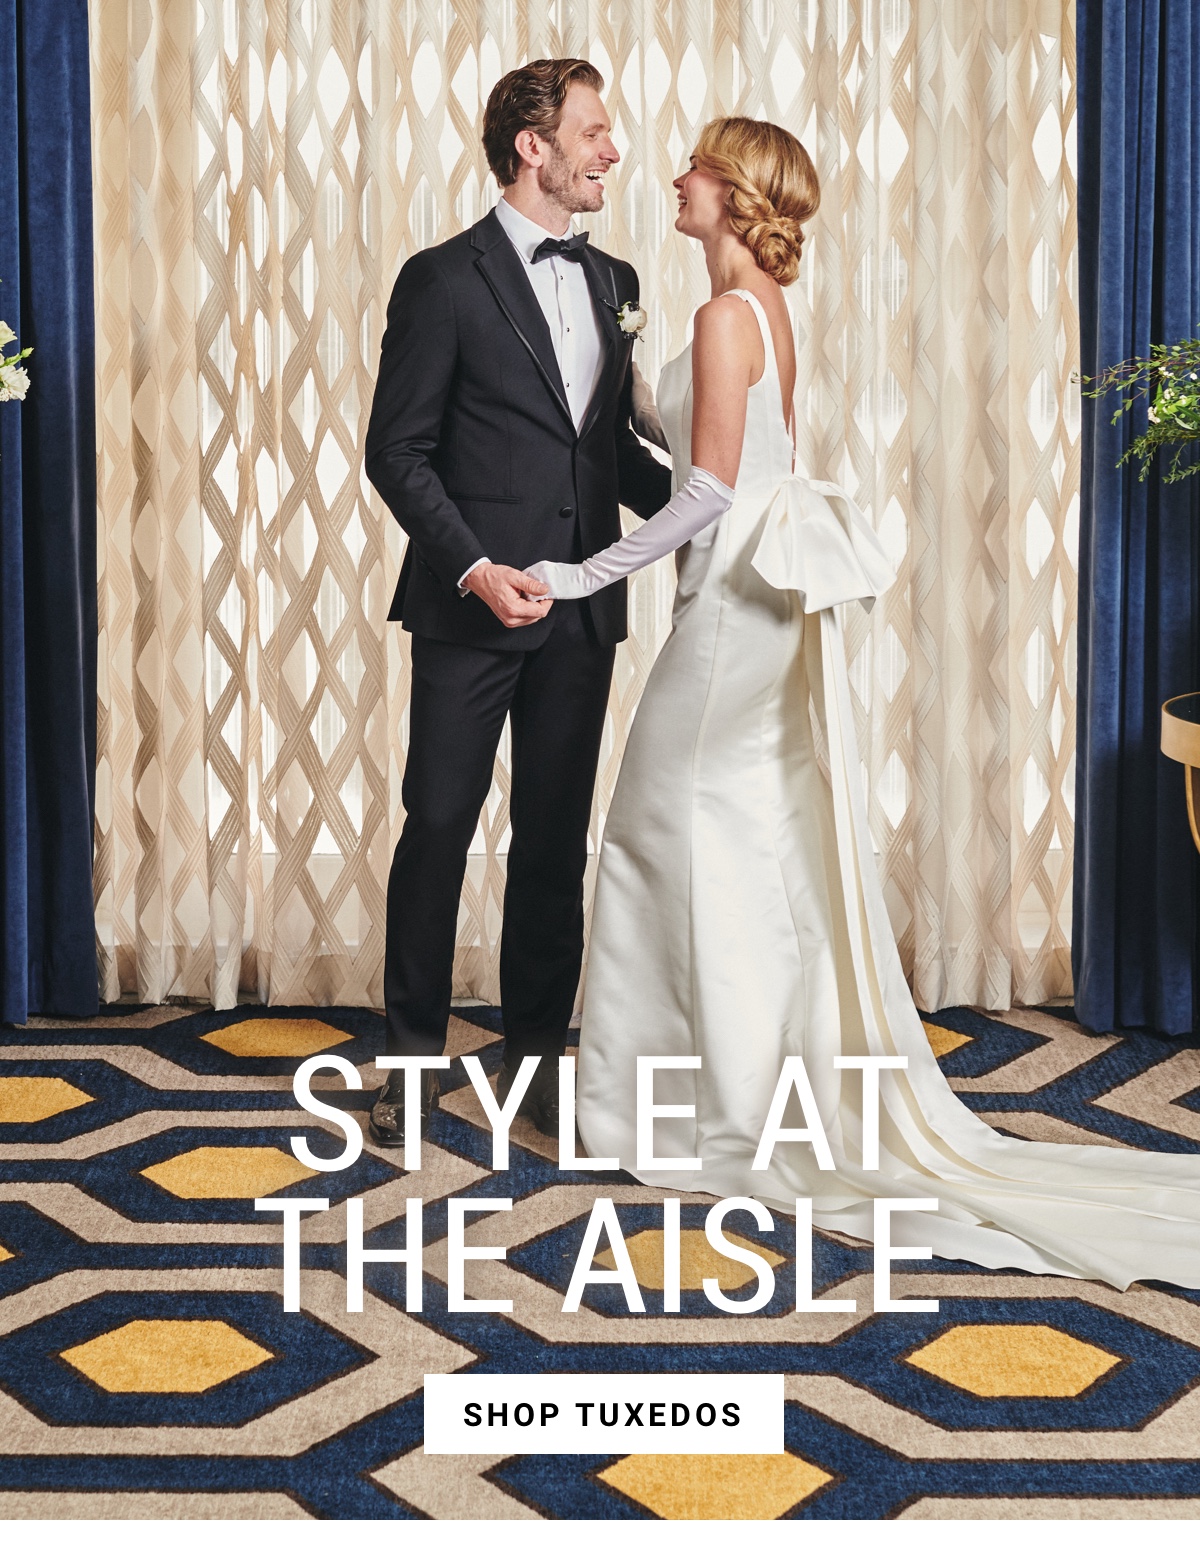 Shop tuxedos for the big day